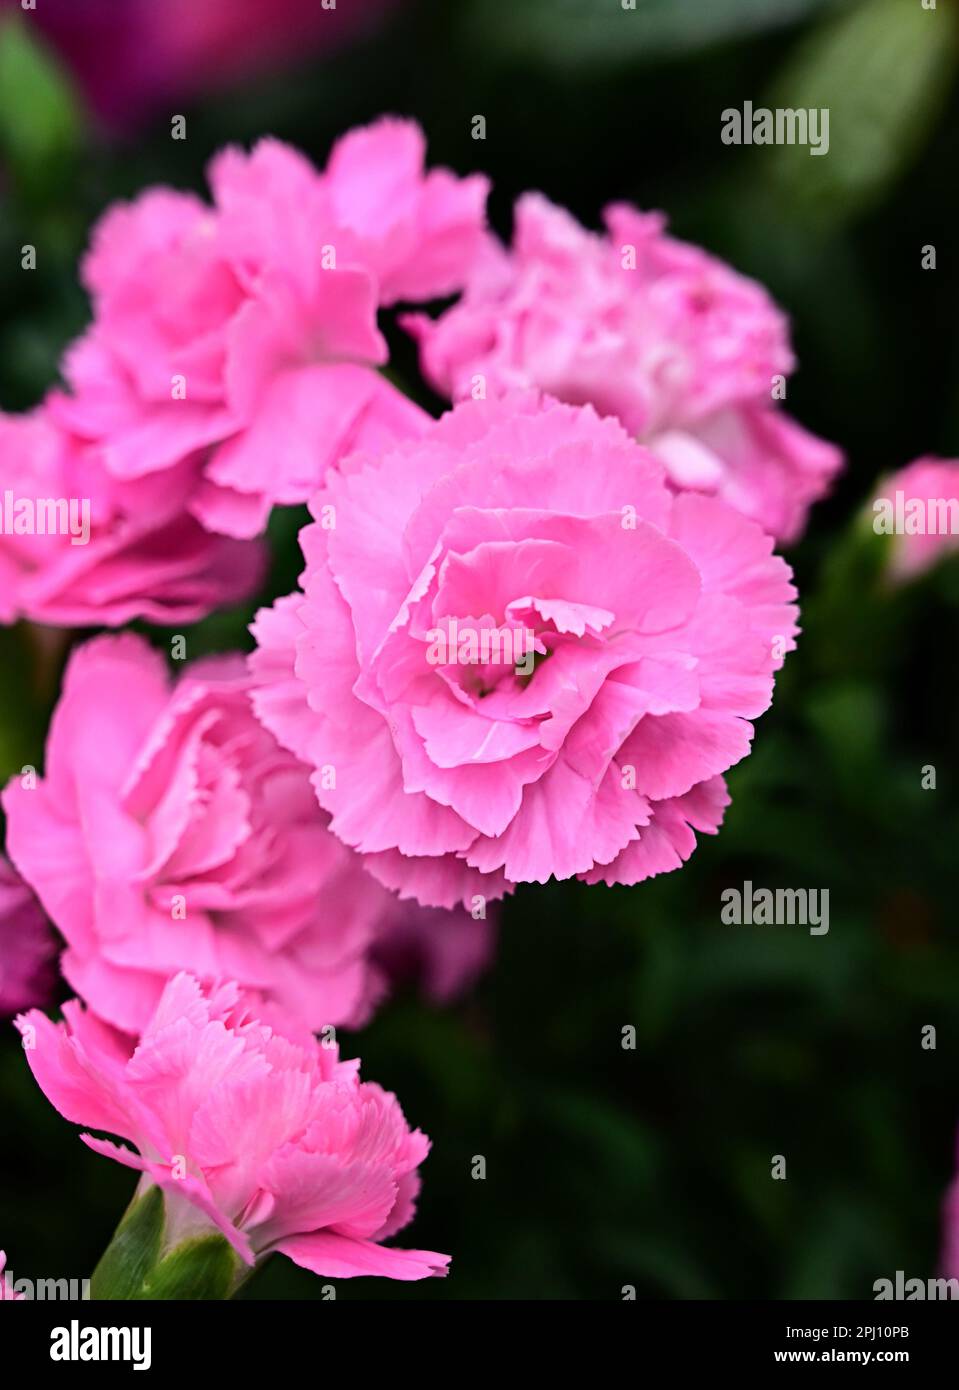 Carnation on a dark background close-up. Pink carnation with a green branch. Stock Photo